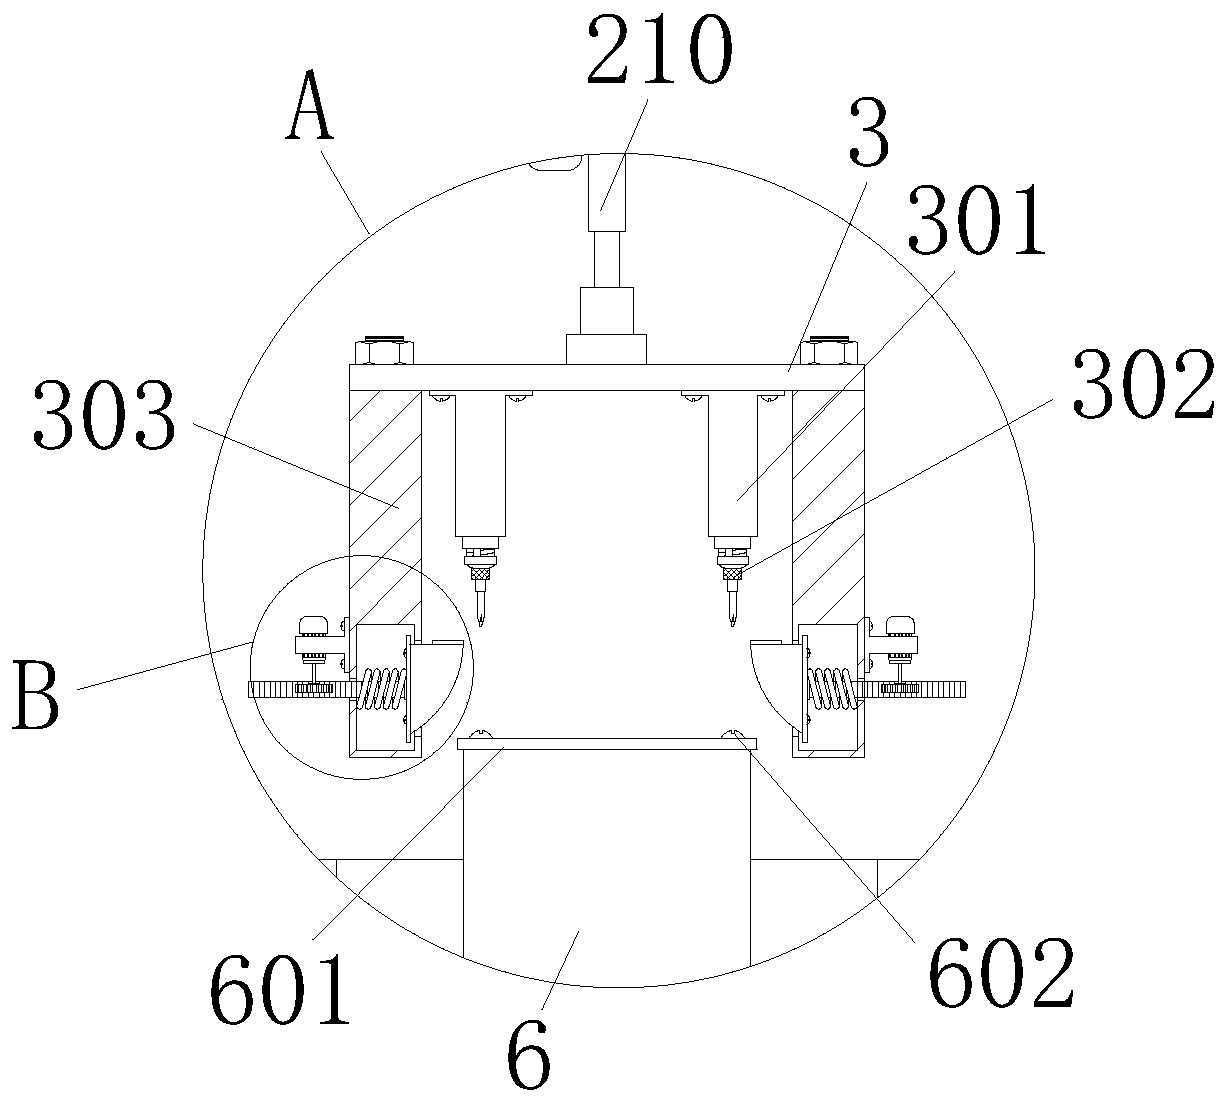 A discrete physical device for dismantling the structural bottom plate of a power battery module